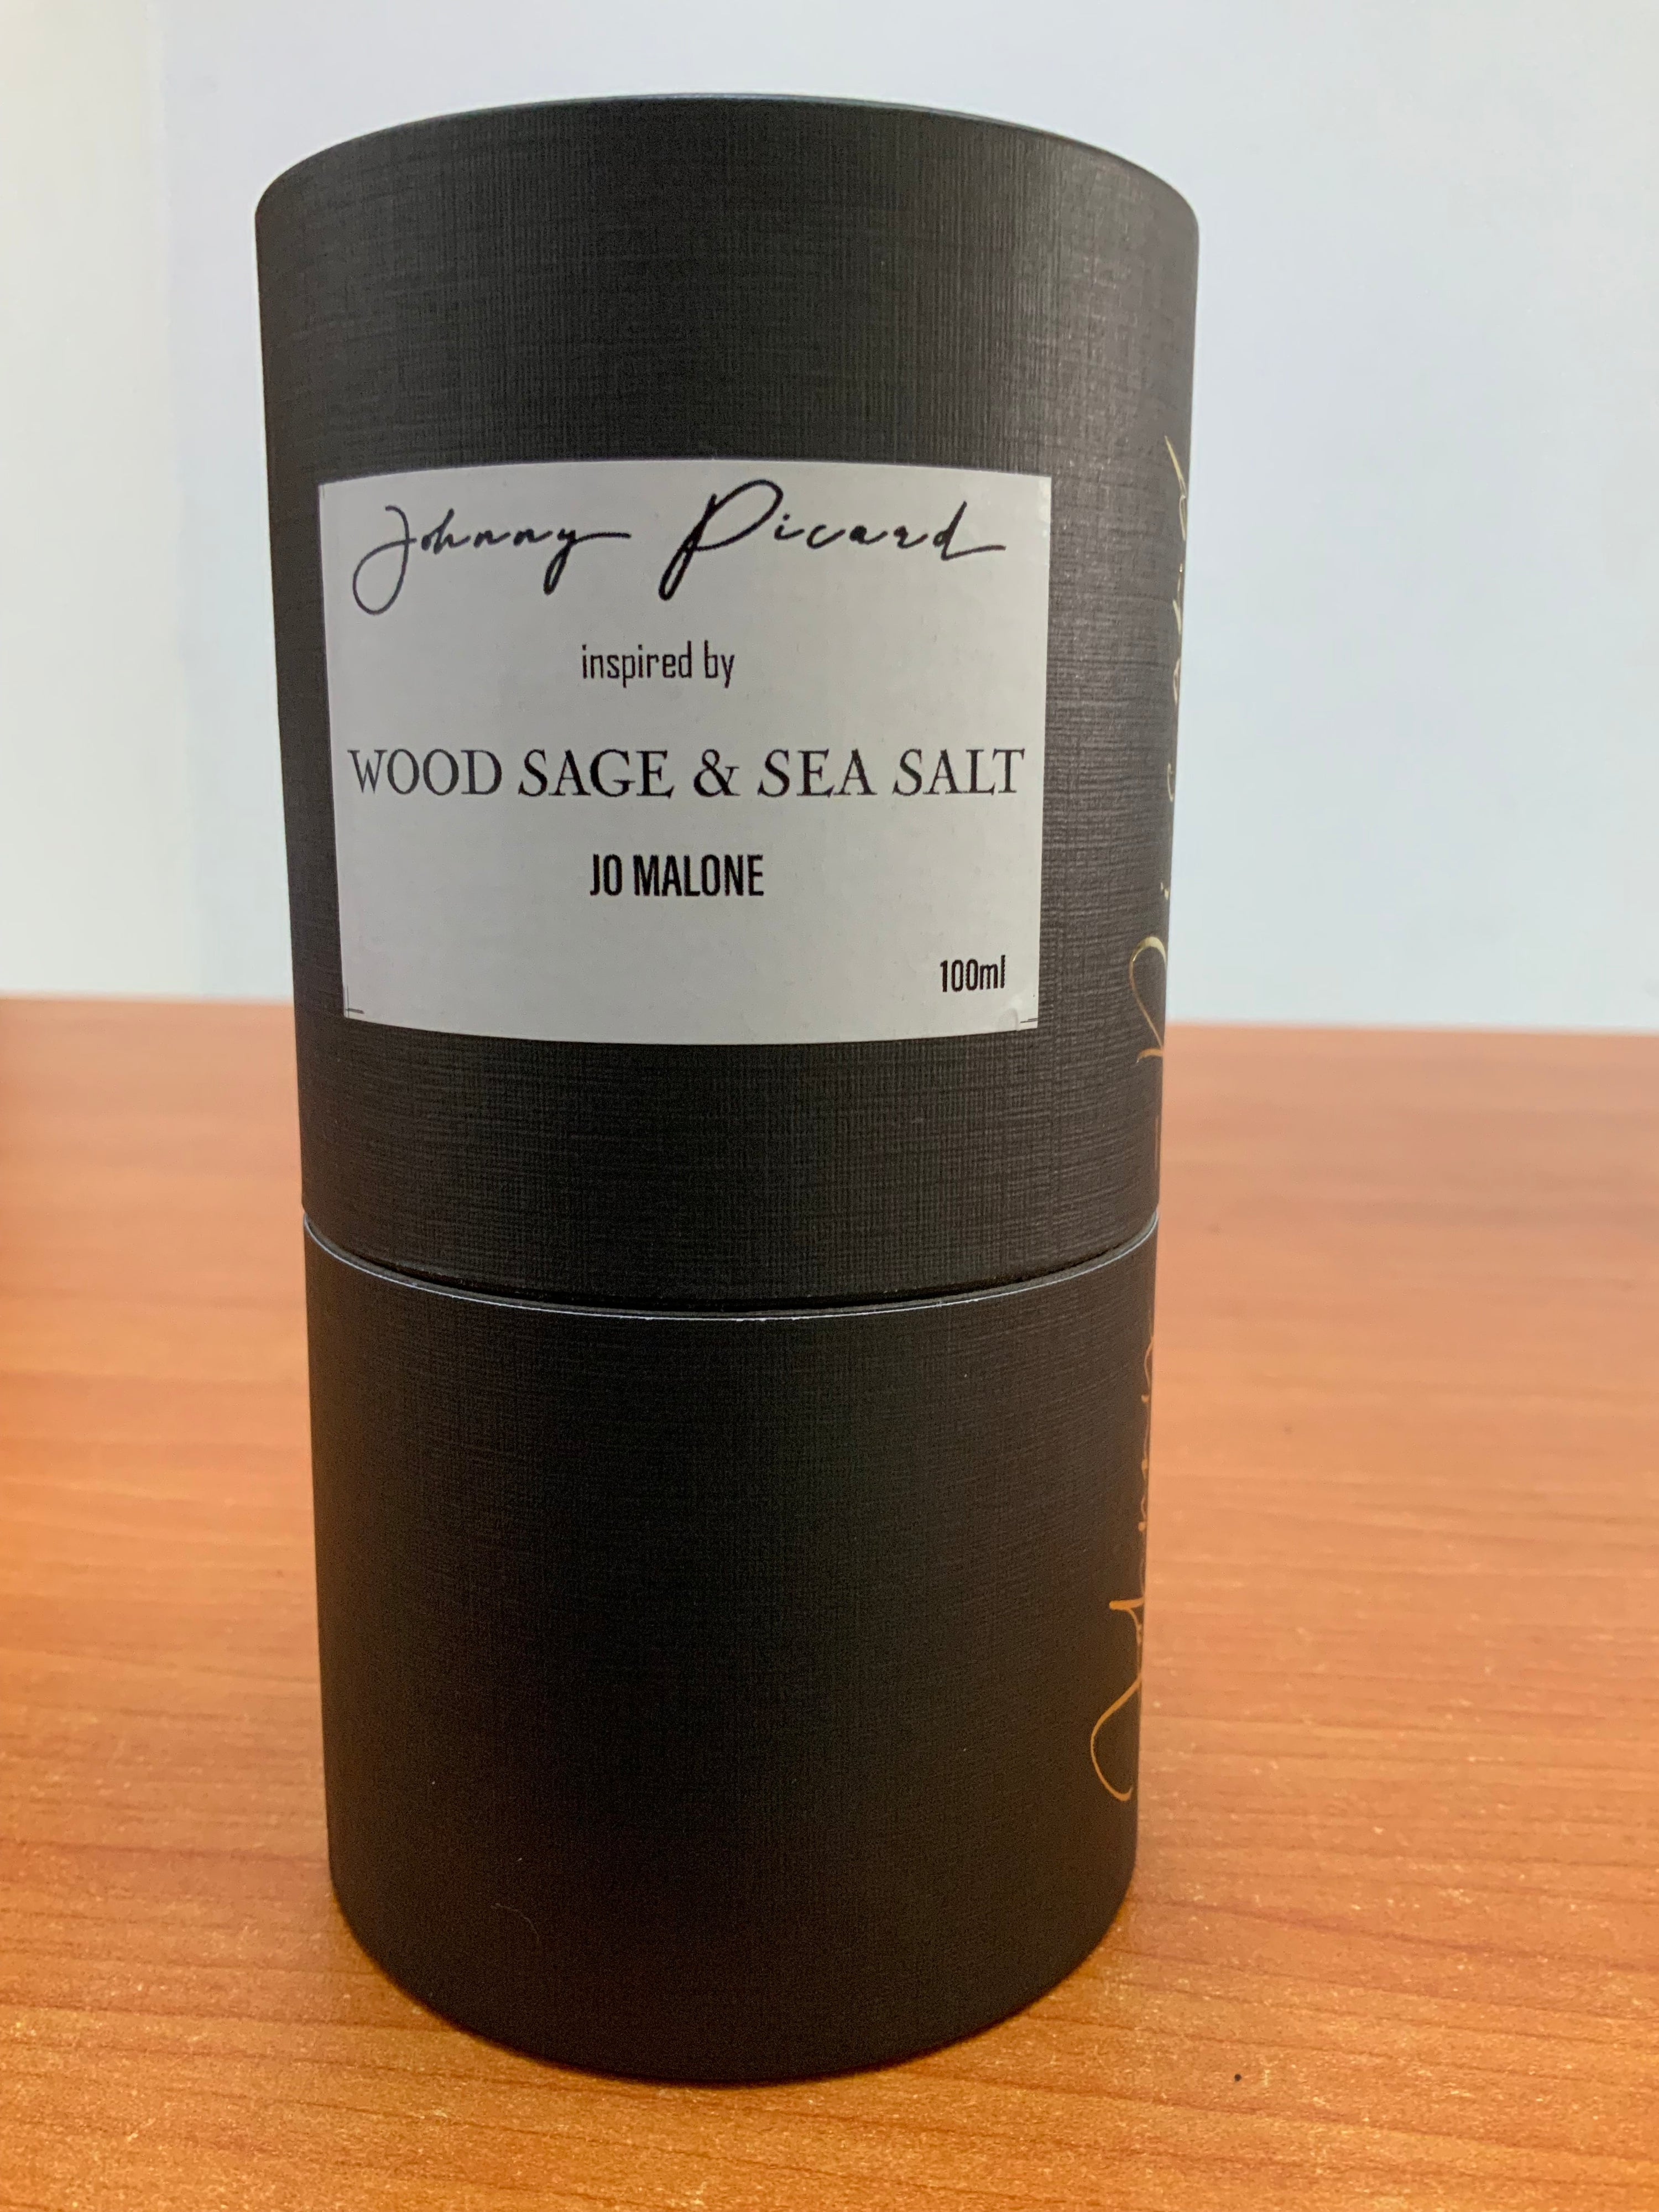 Johnny Picard inspired by Wood Sage & Sea Salt   Jo Malone